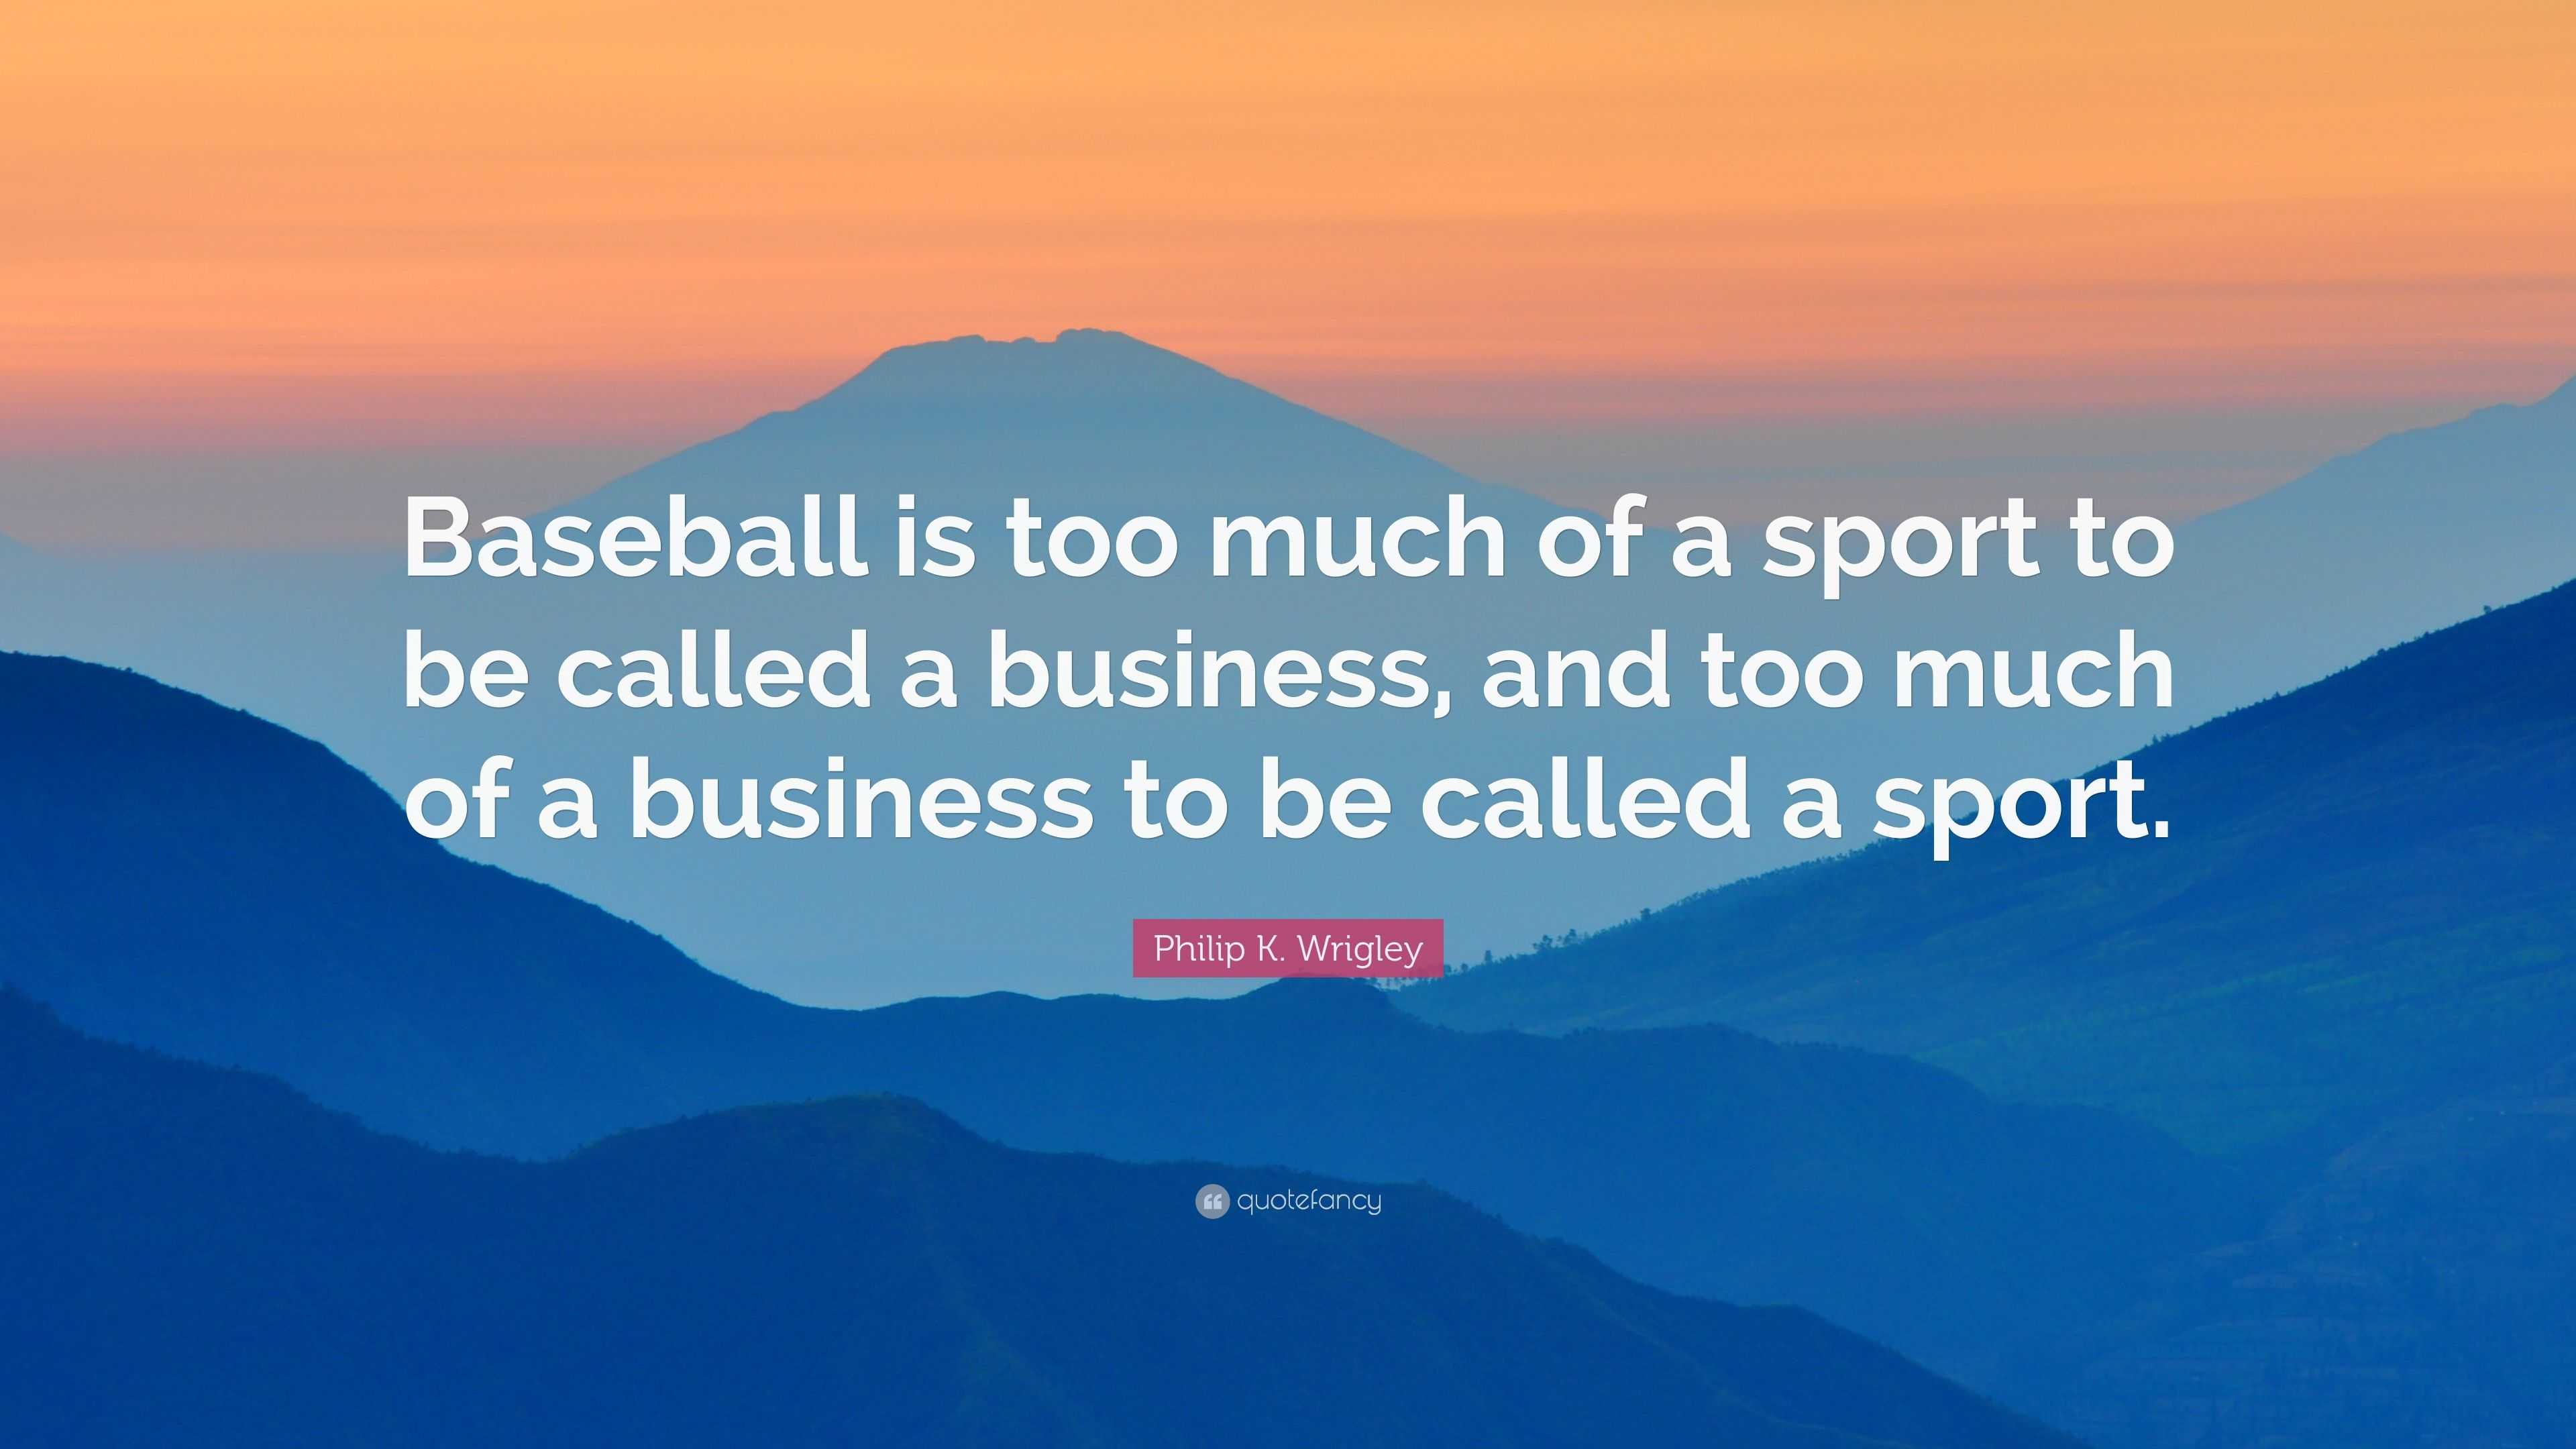 Philip K. Wrigley Quote: “Baseball is too much of a sport to be called ...